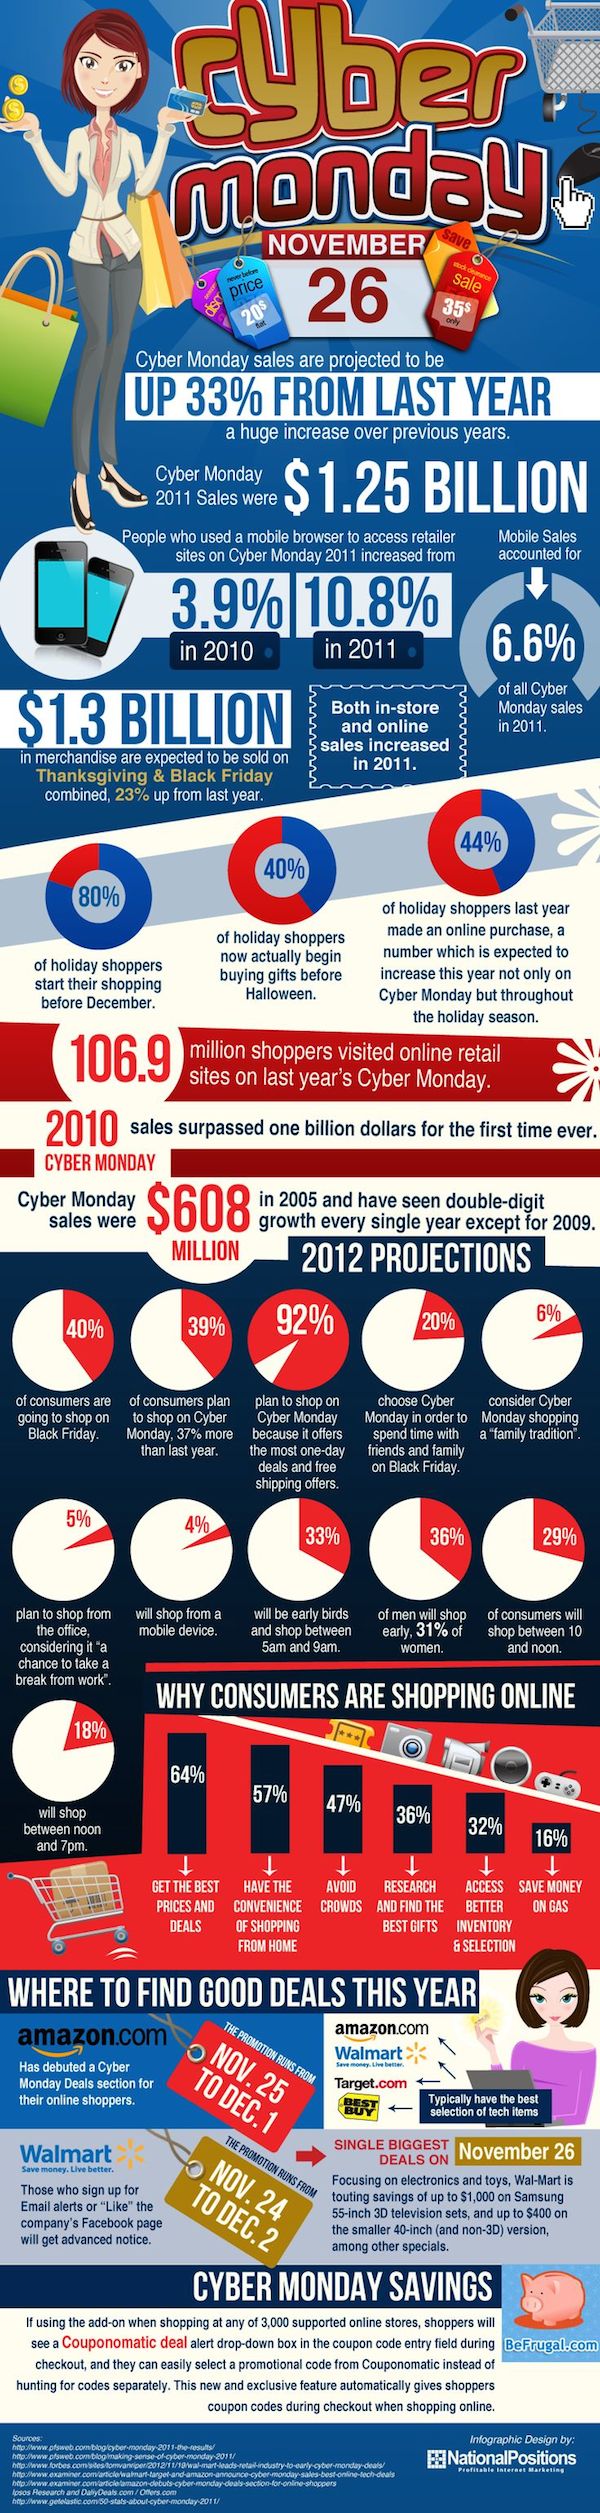 20 Black Friday And Cyber Monday Infographics image 16.jpg